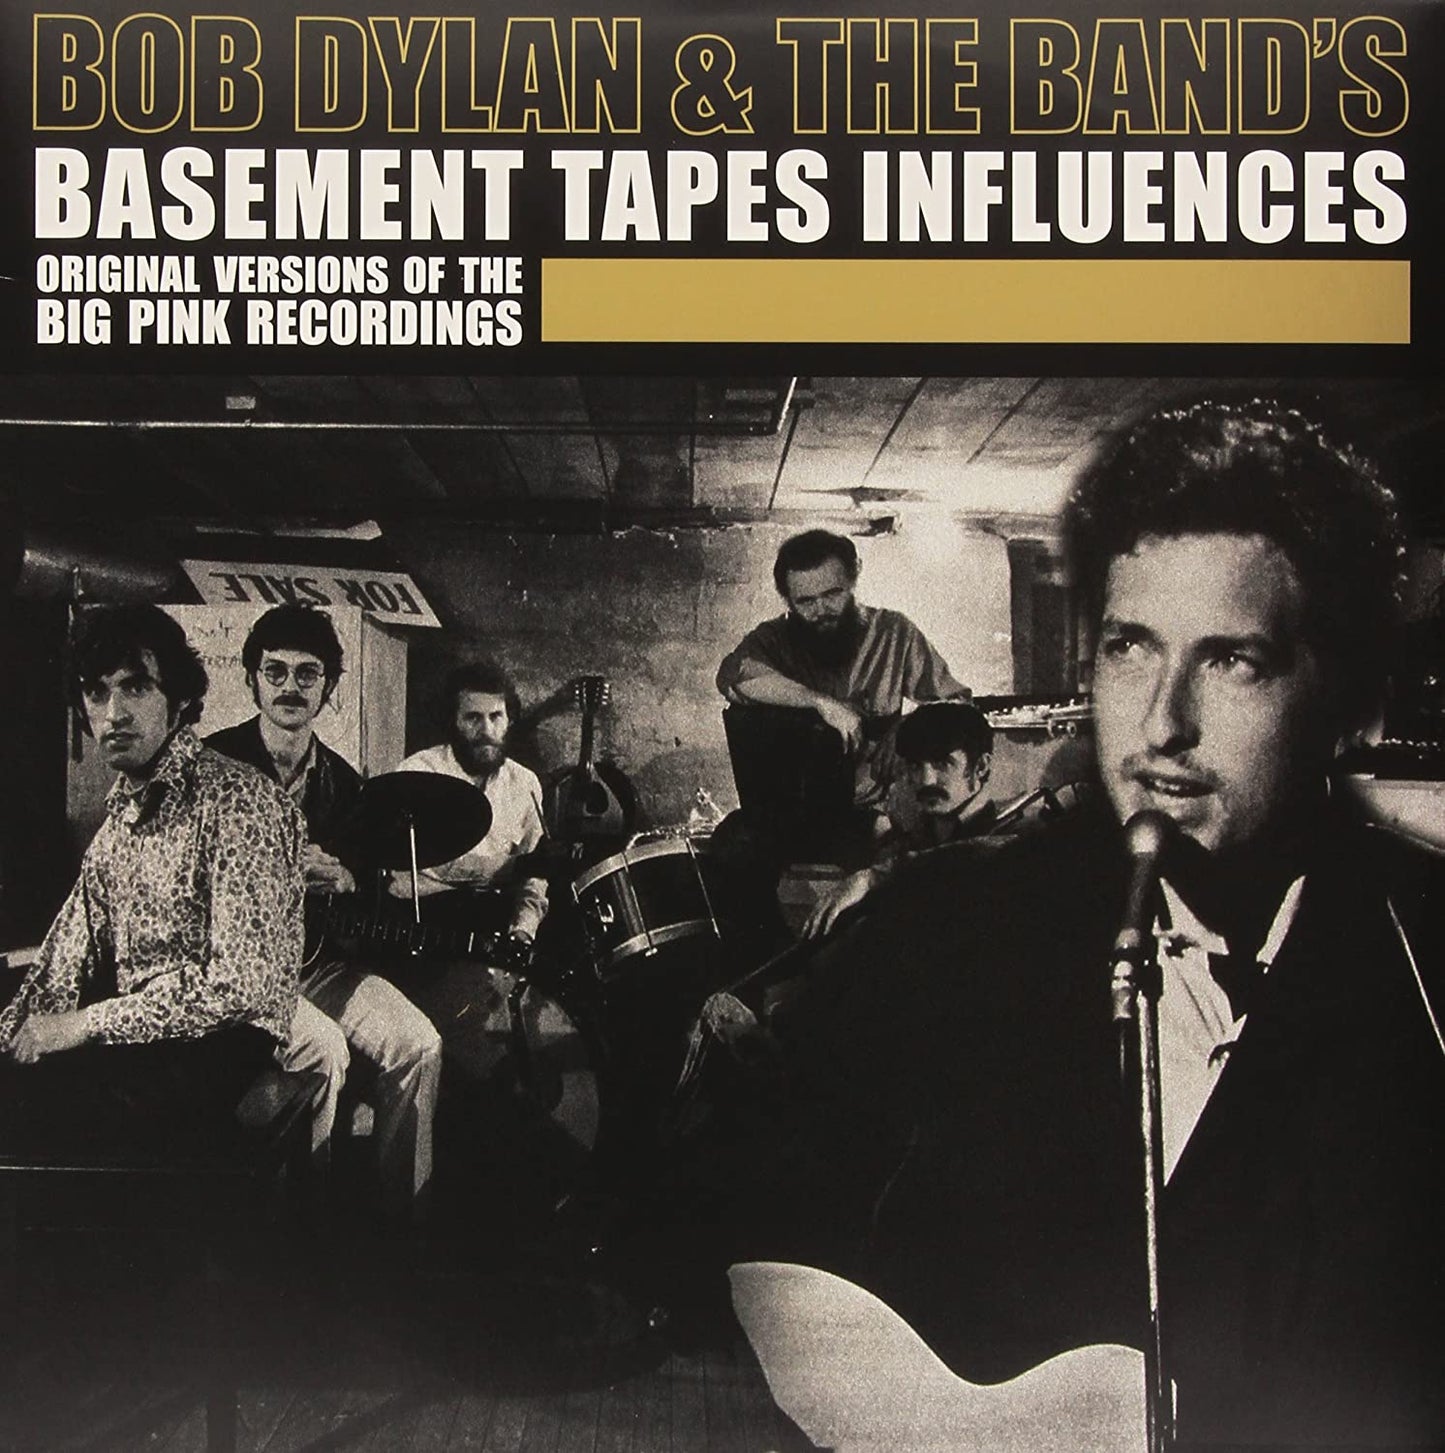 V/A - Bob Dylan And the Bands Basement Tapes Influences - 2LP